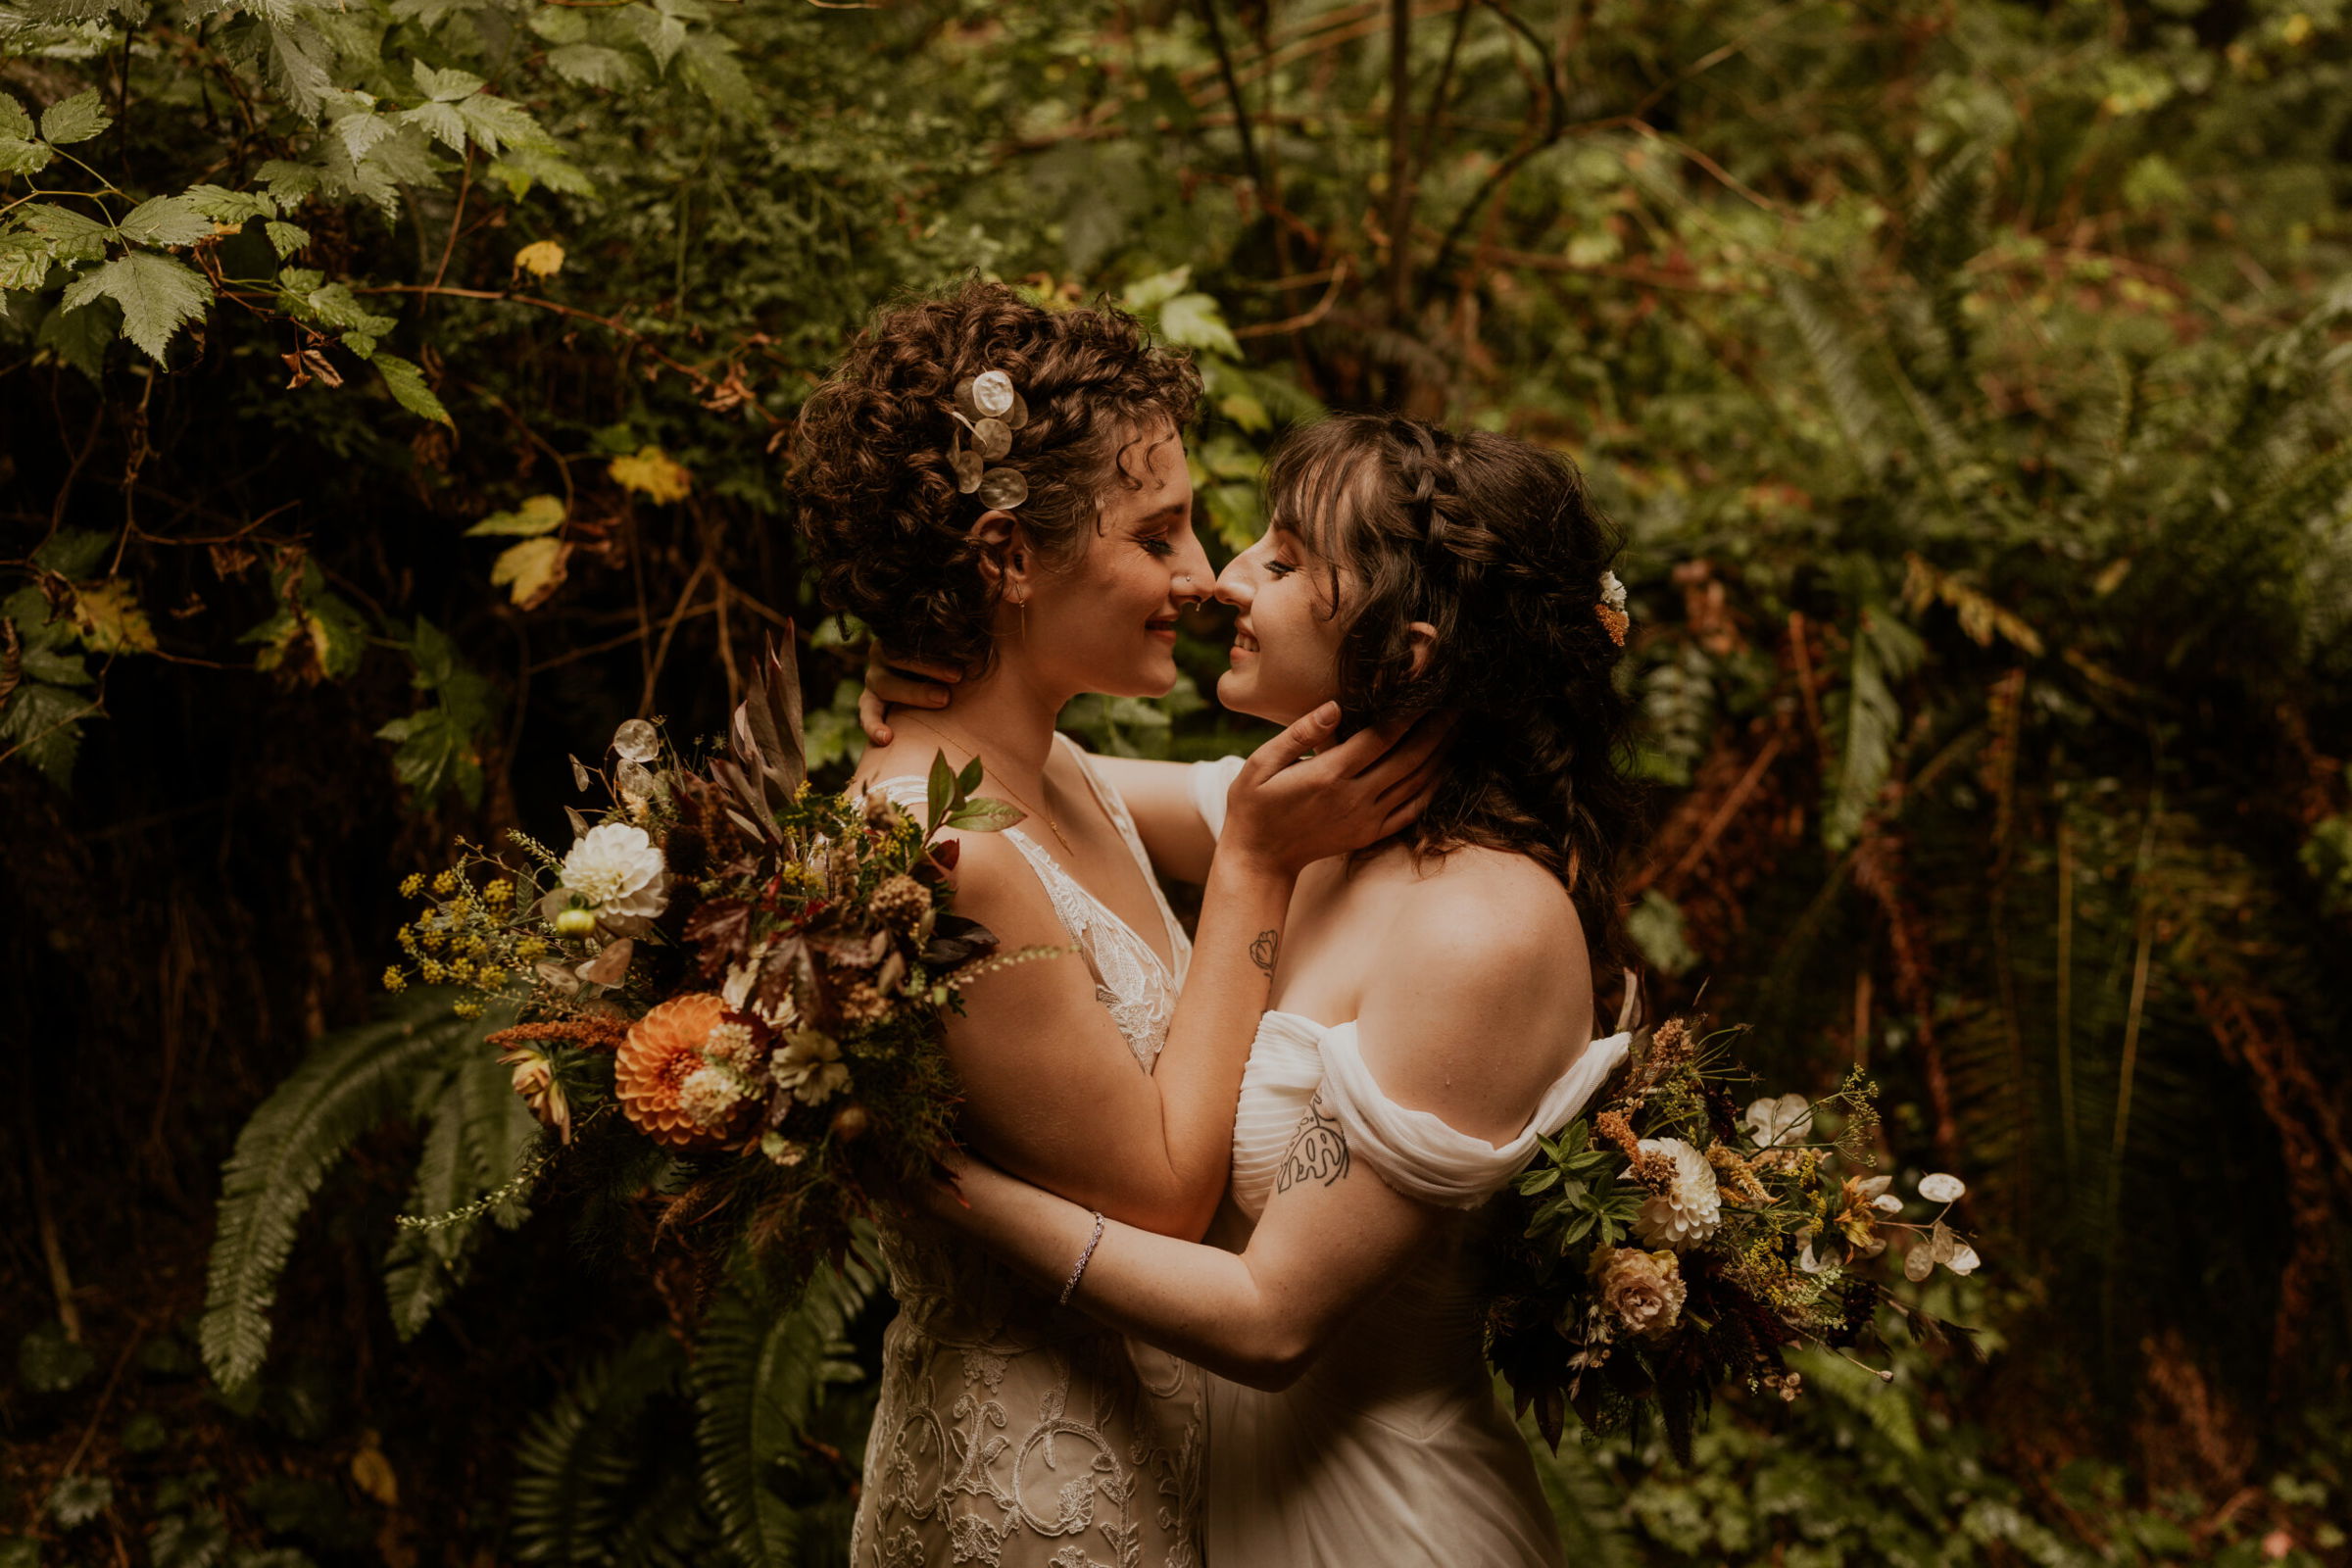 Two brides hold each other in a forest.